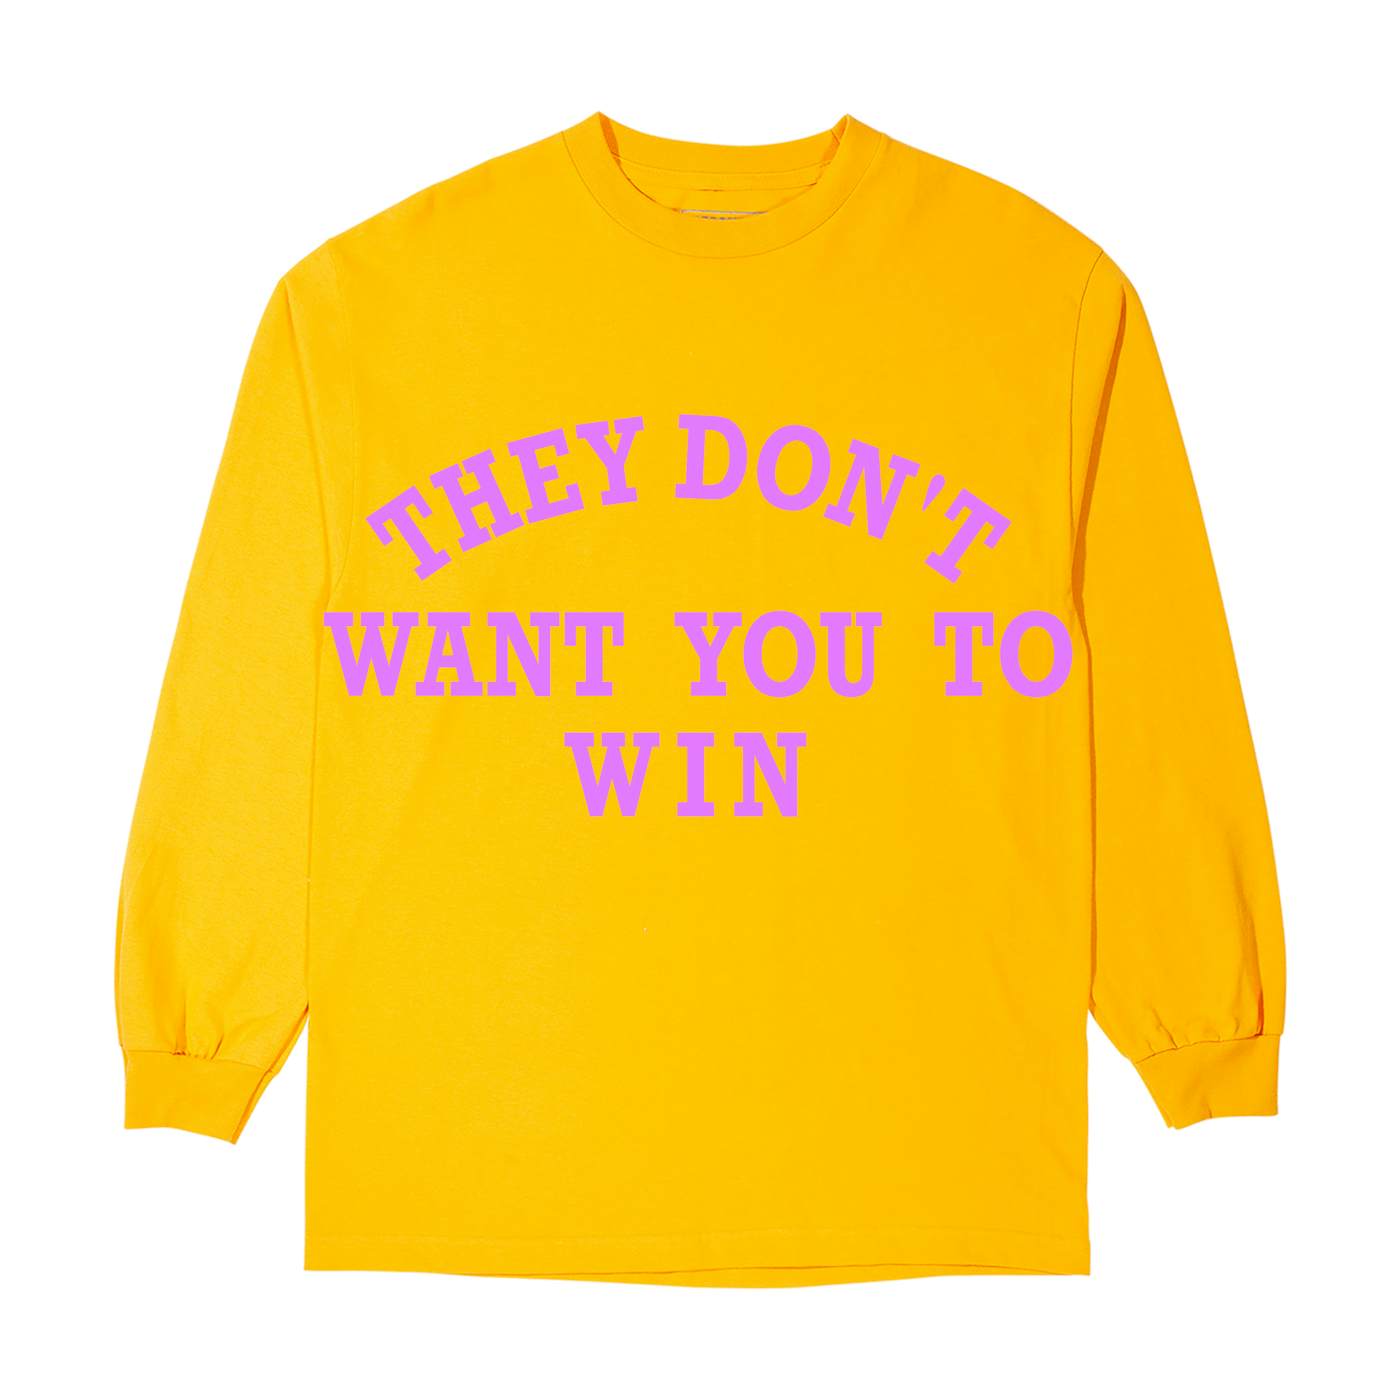 DJ Khaled They Don't Want You To Win Yellow Long-Sleeve T-Shirt